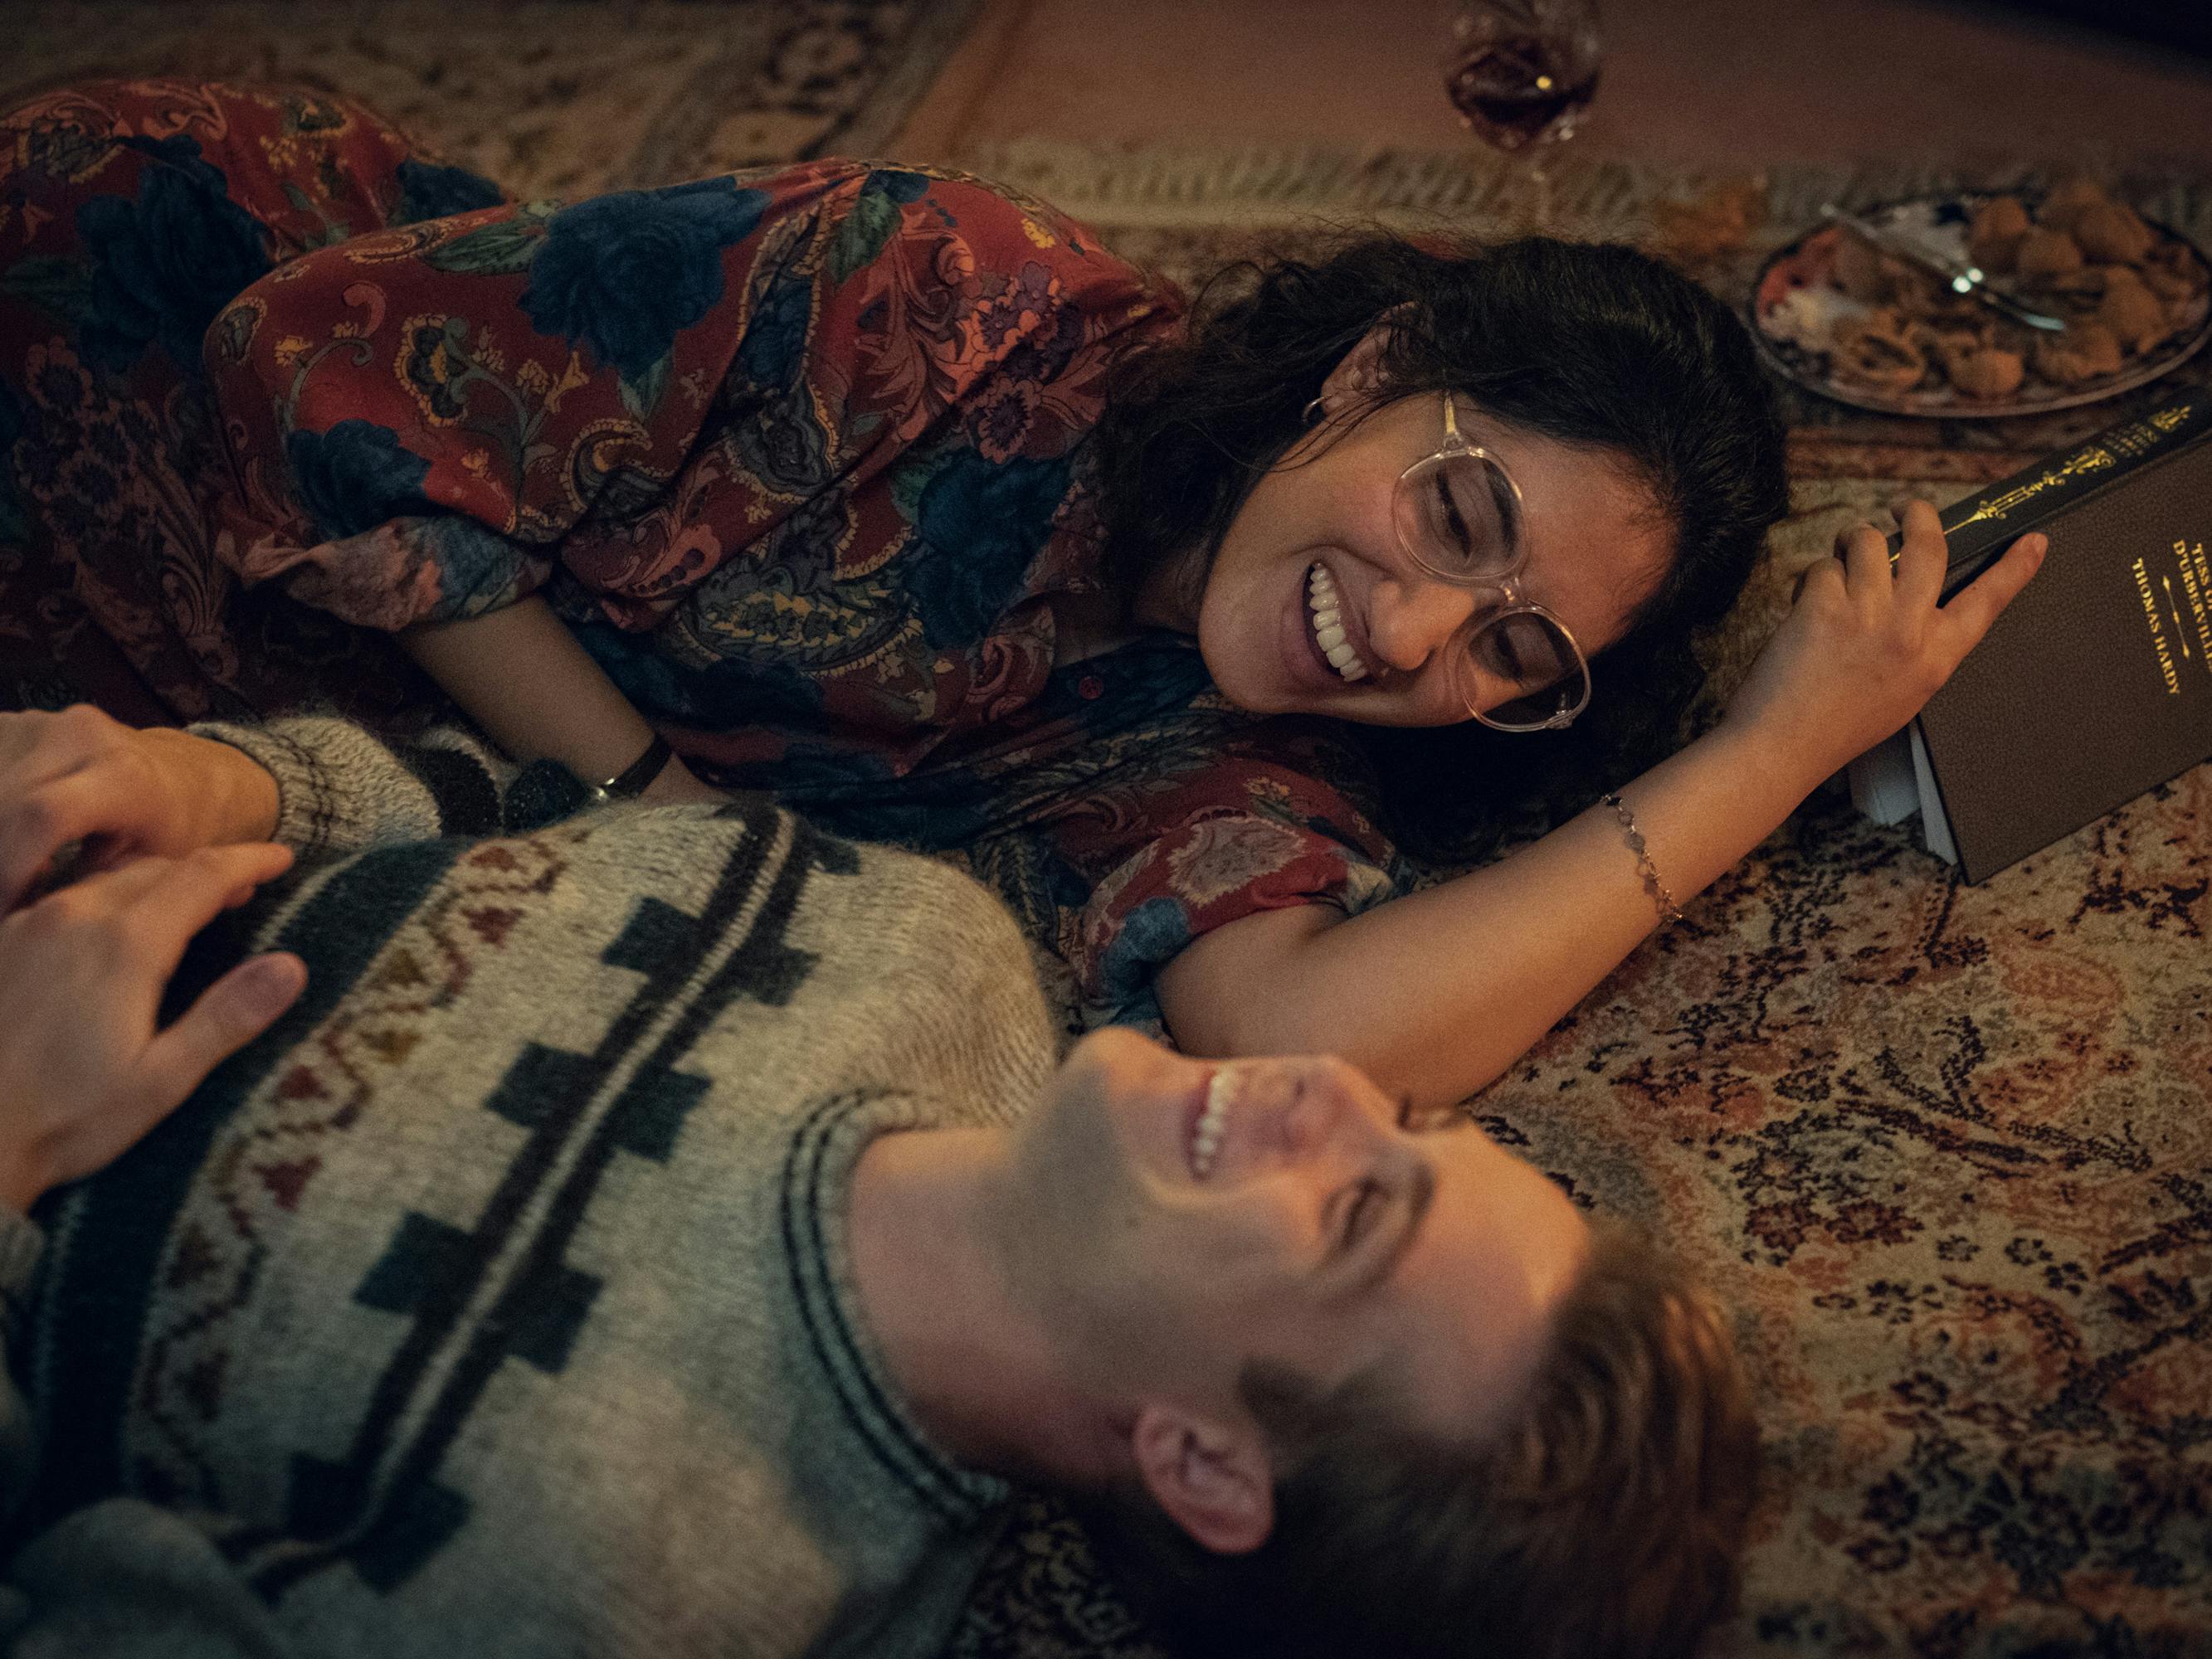 Dexter Mayhew (Leo Woodall) and Emma Morley (Ambika Mod) lie on a patterned rug laughing.